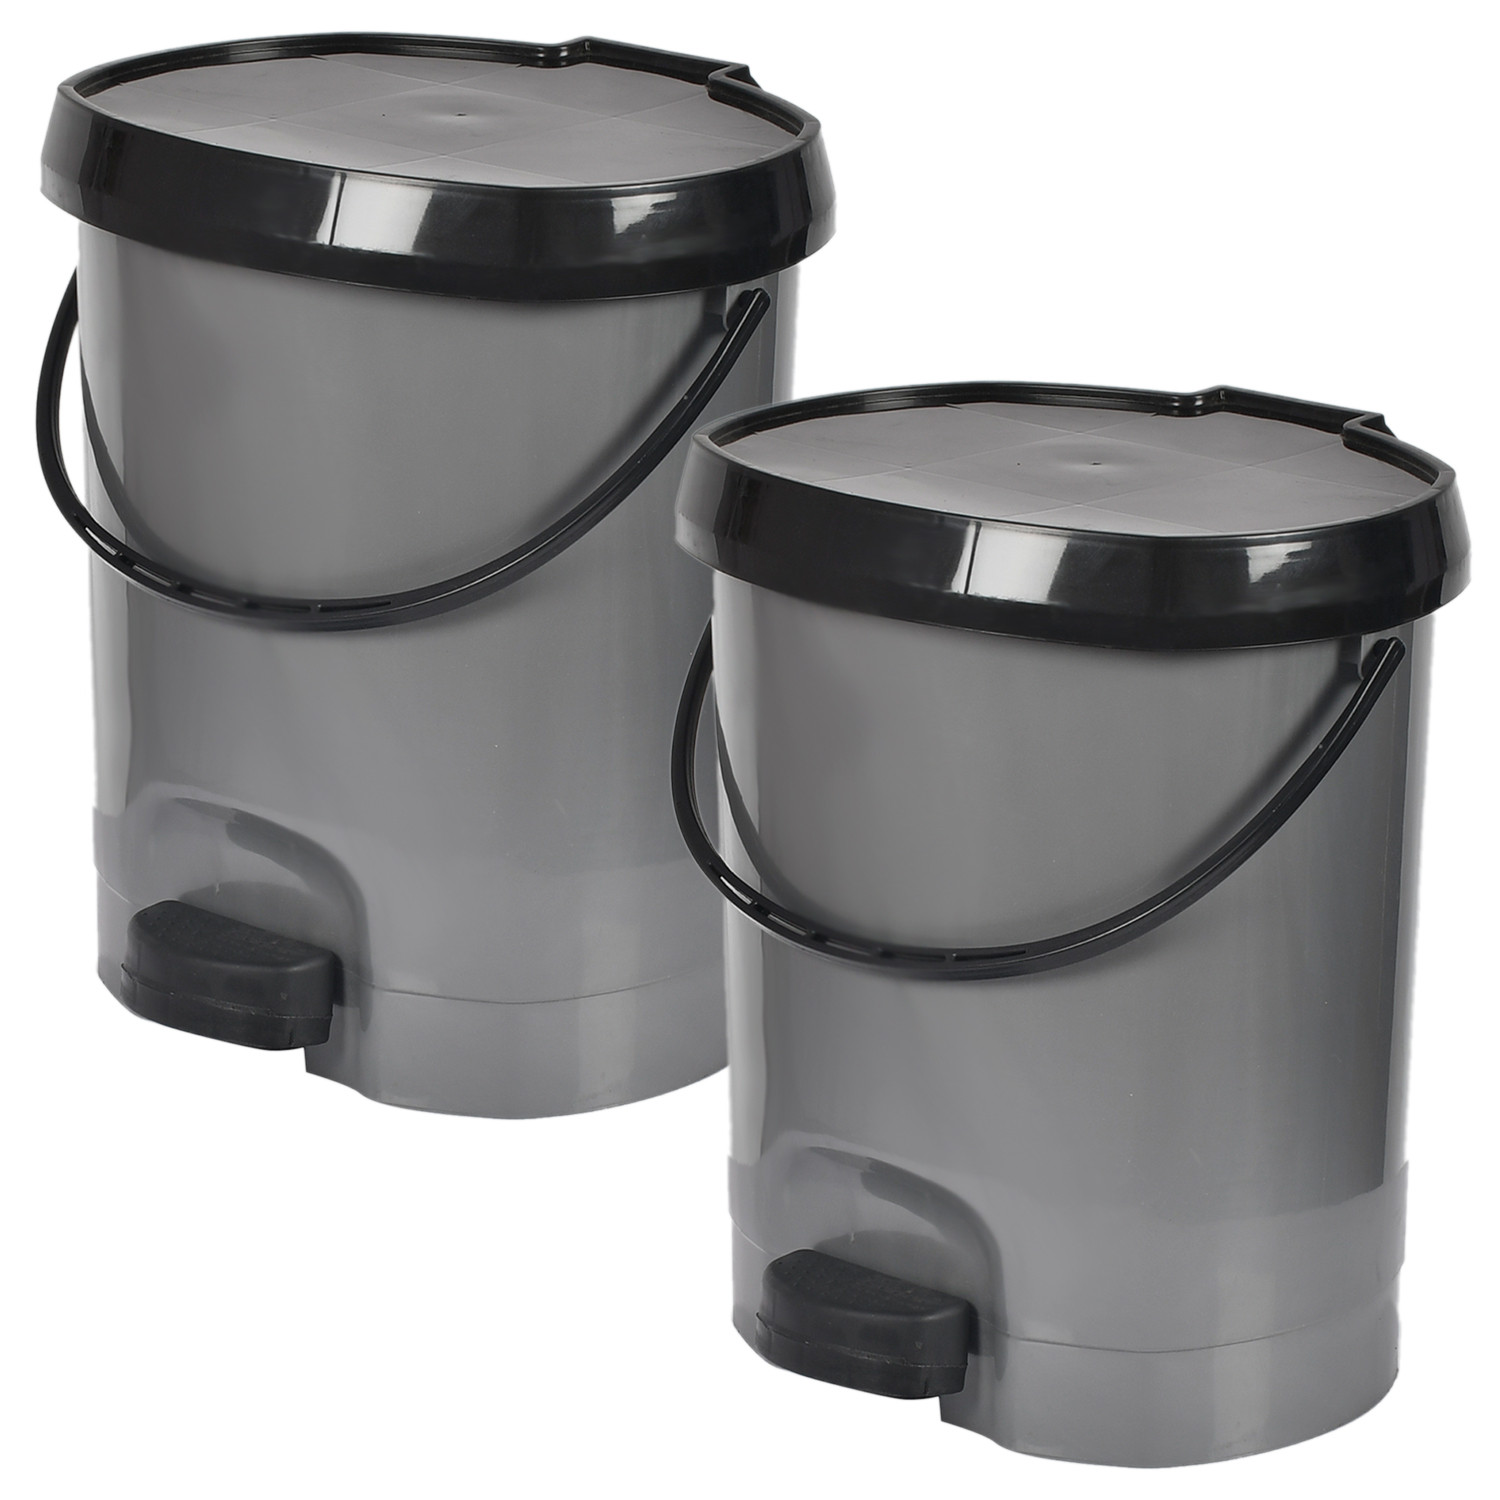 Kuber Industries Multiuses Plastic Pedal Dustbin, Waste Bin, Trash Can With Detachable Bucket, 10 Litre (Grey)-47KM0725